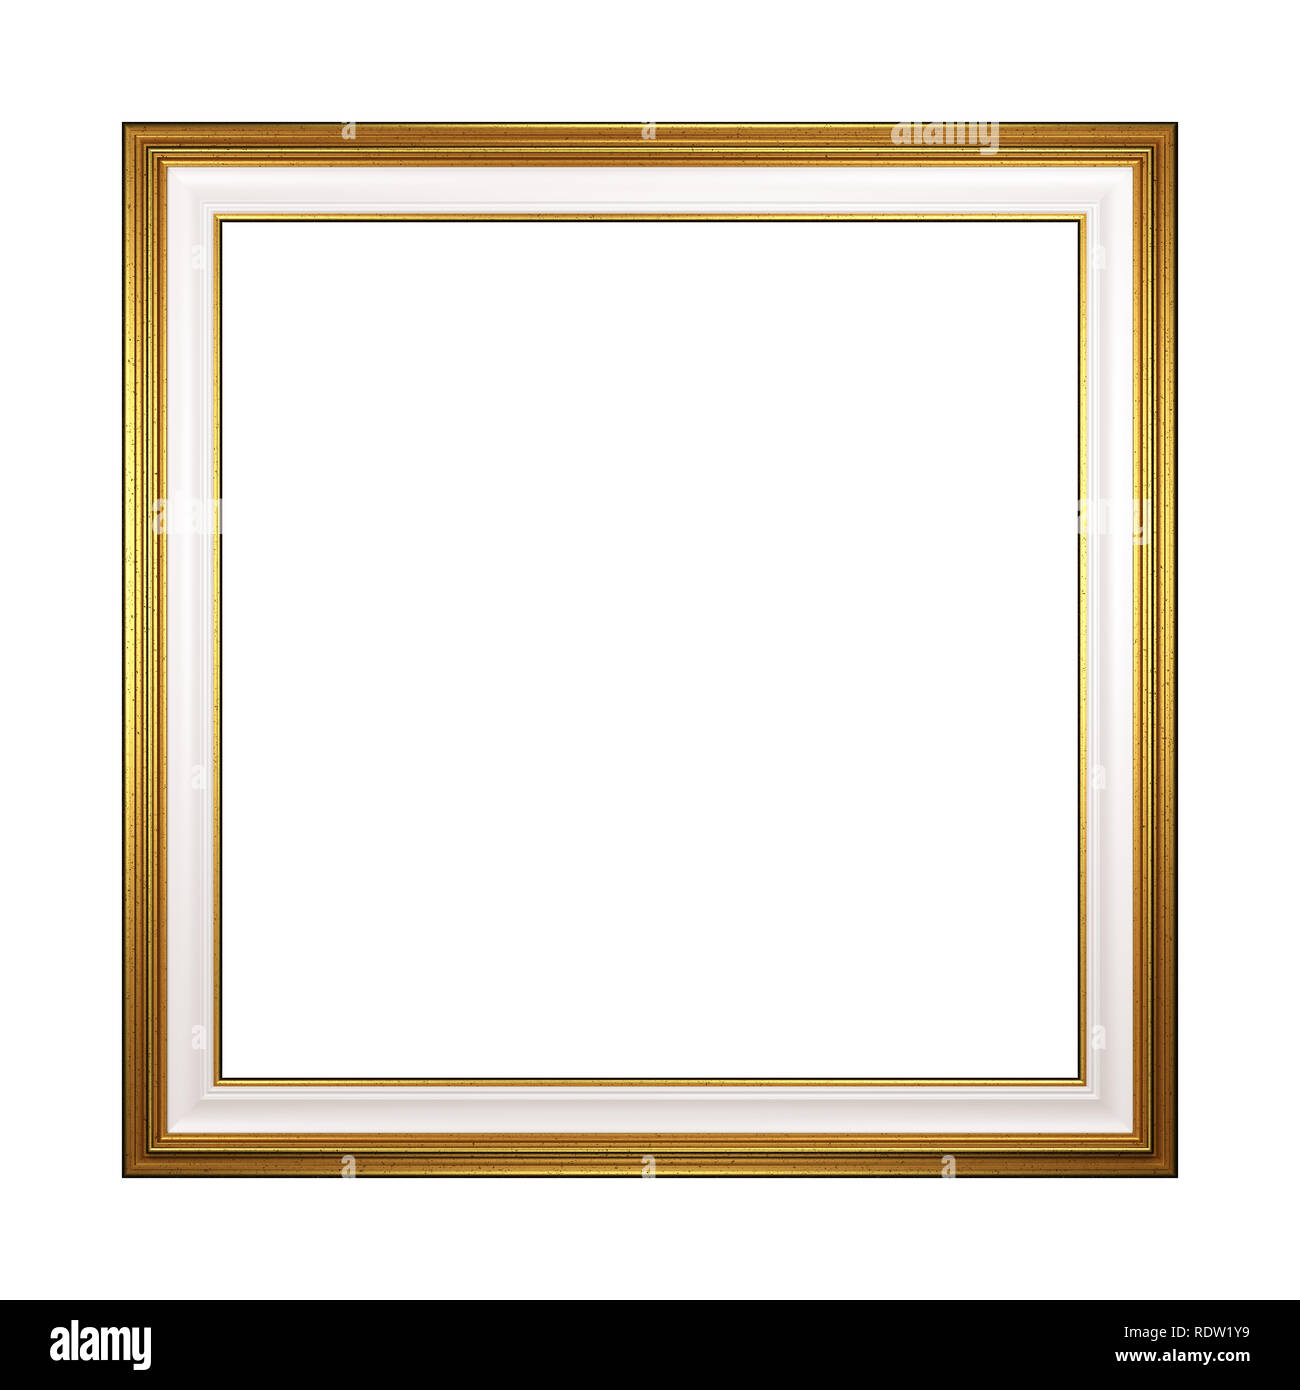 Classic Square Empty Golden Picture Frame Isolated on White Background 3D Render Stock Photo